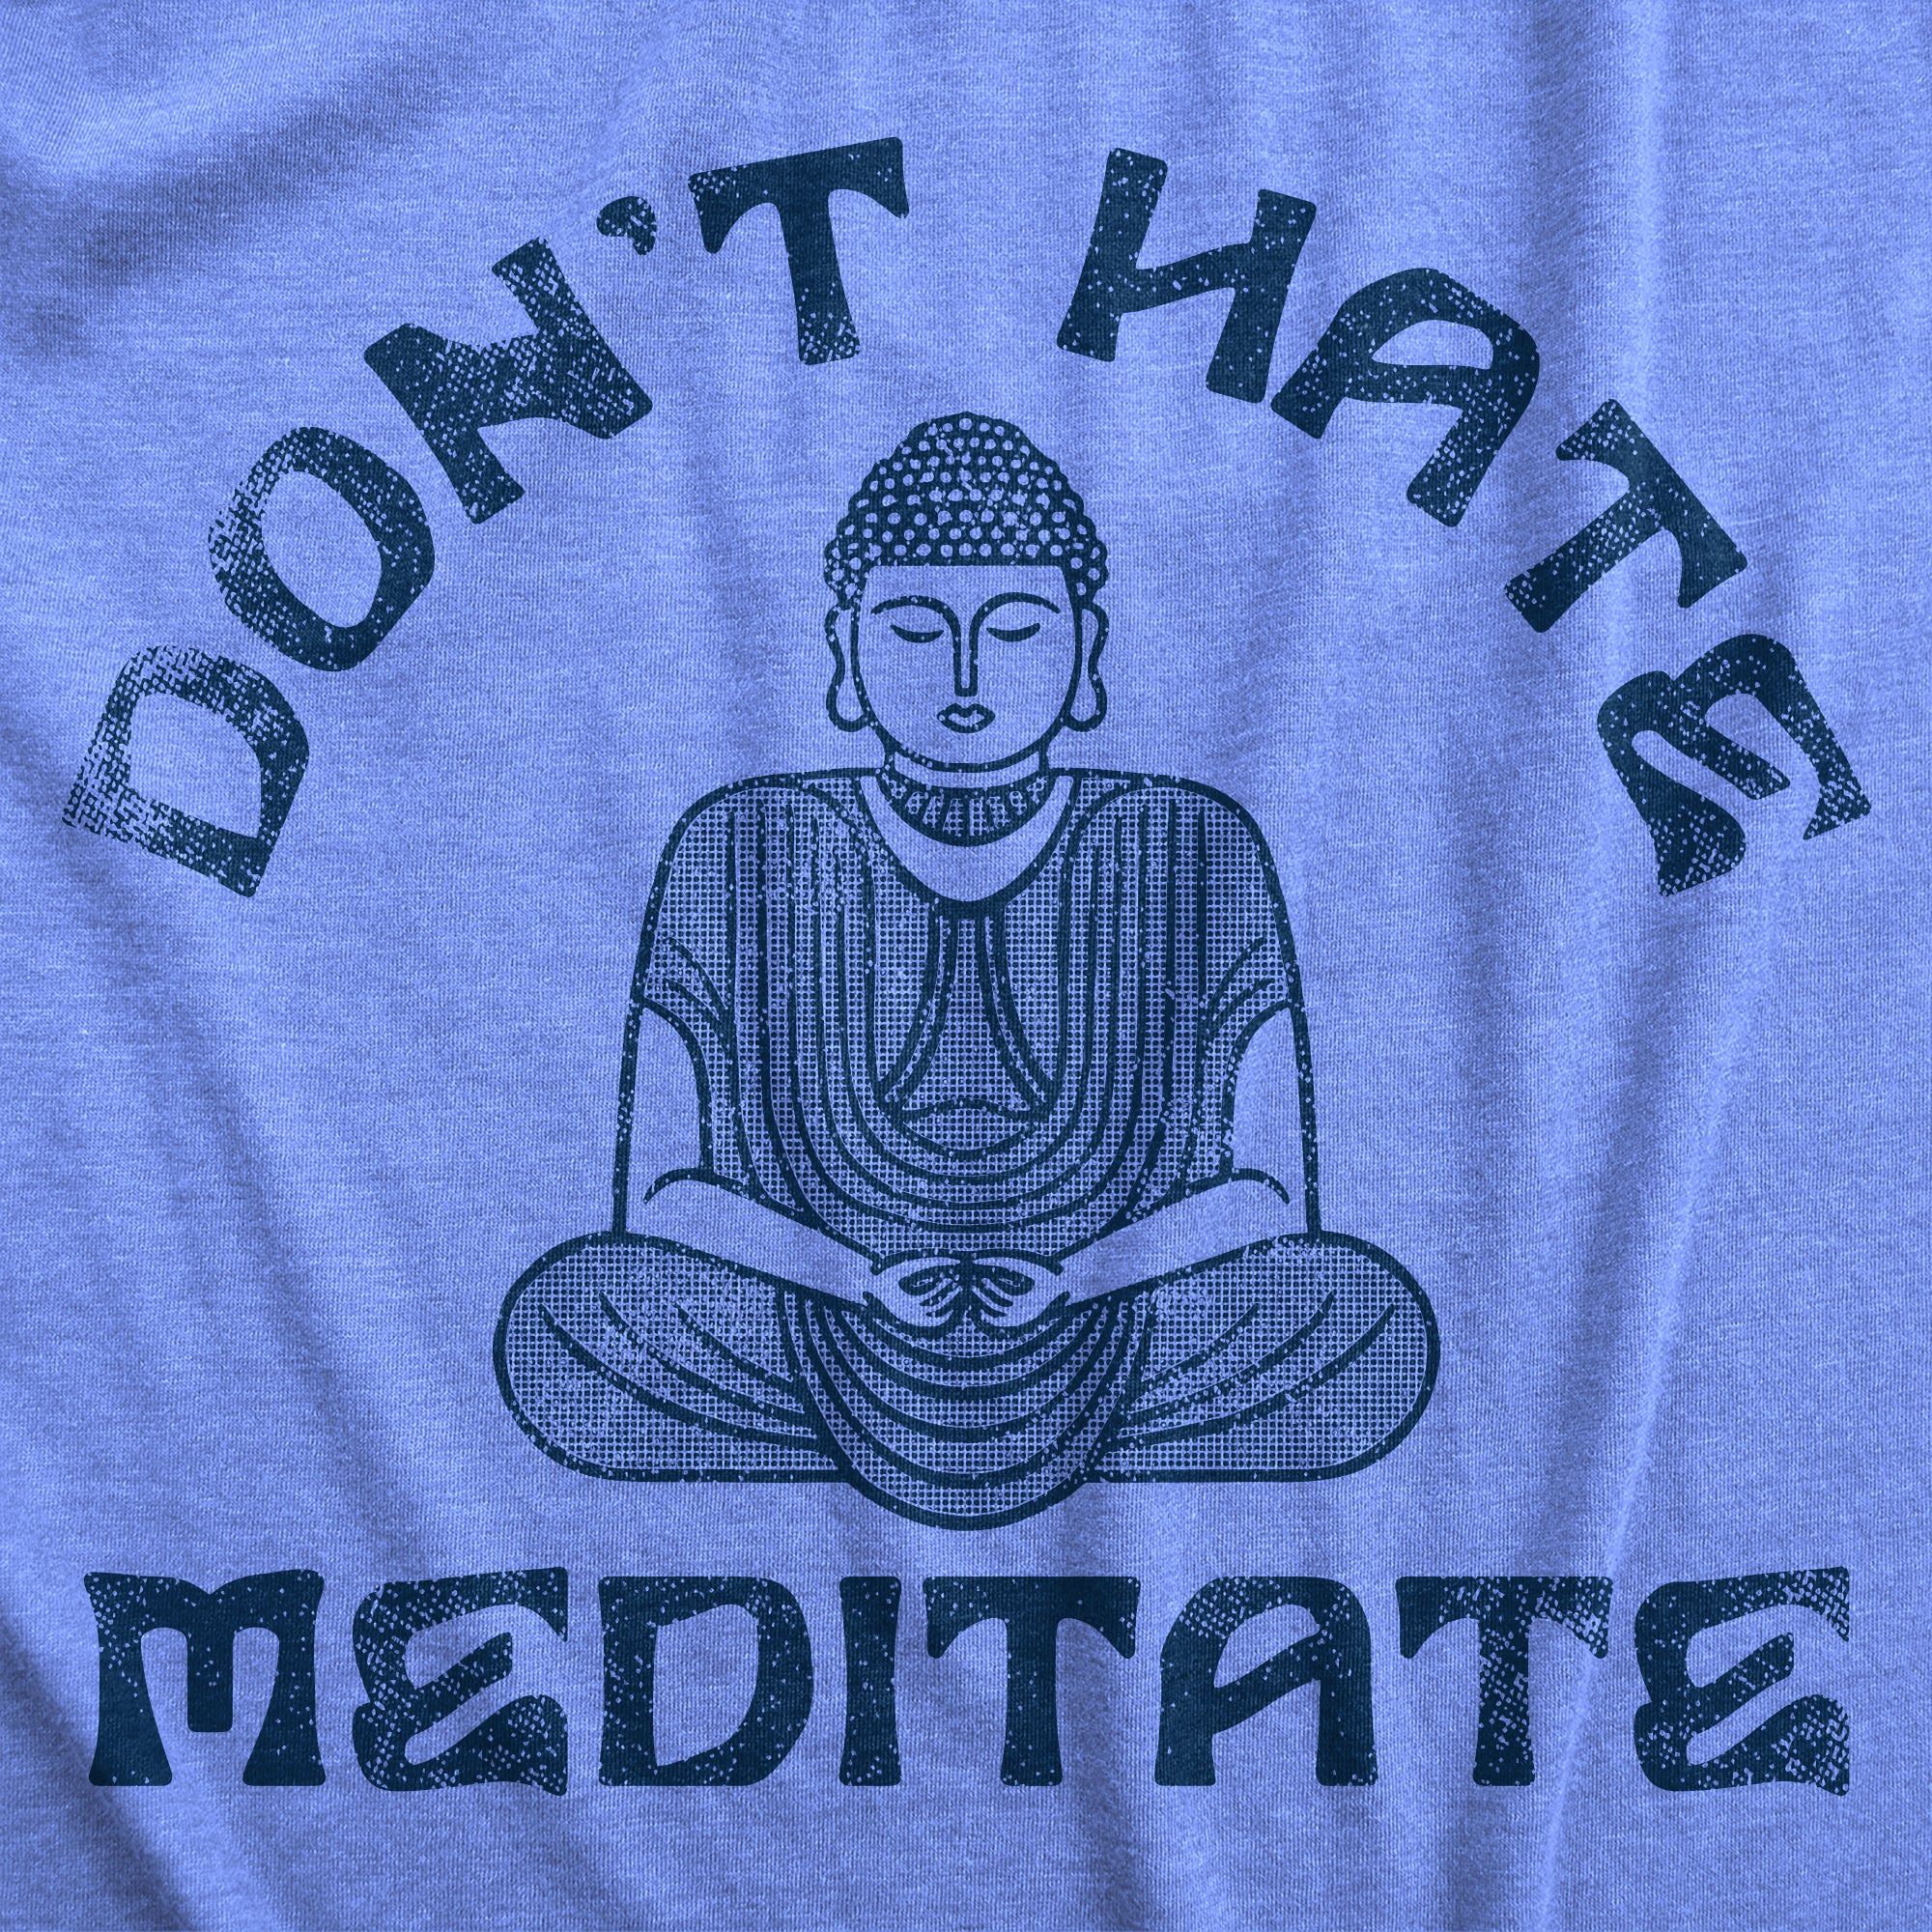 Funny Light Heather Blue - Dont Hate Dont Hate Meditate Womens T Shirt Nerdy Sarcastic Motivational Tee